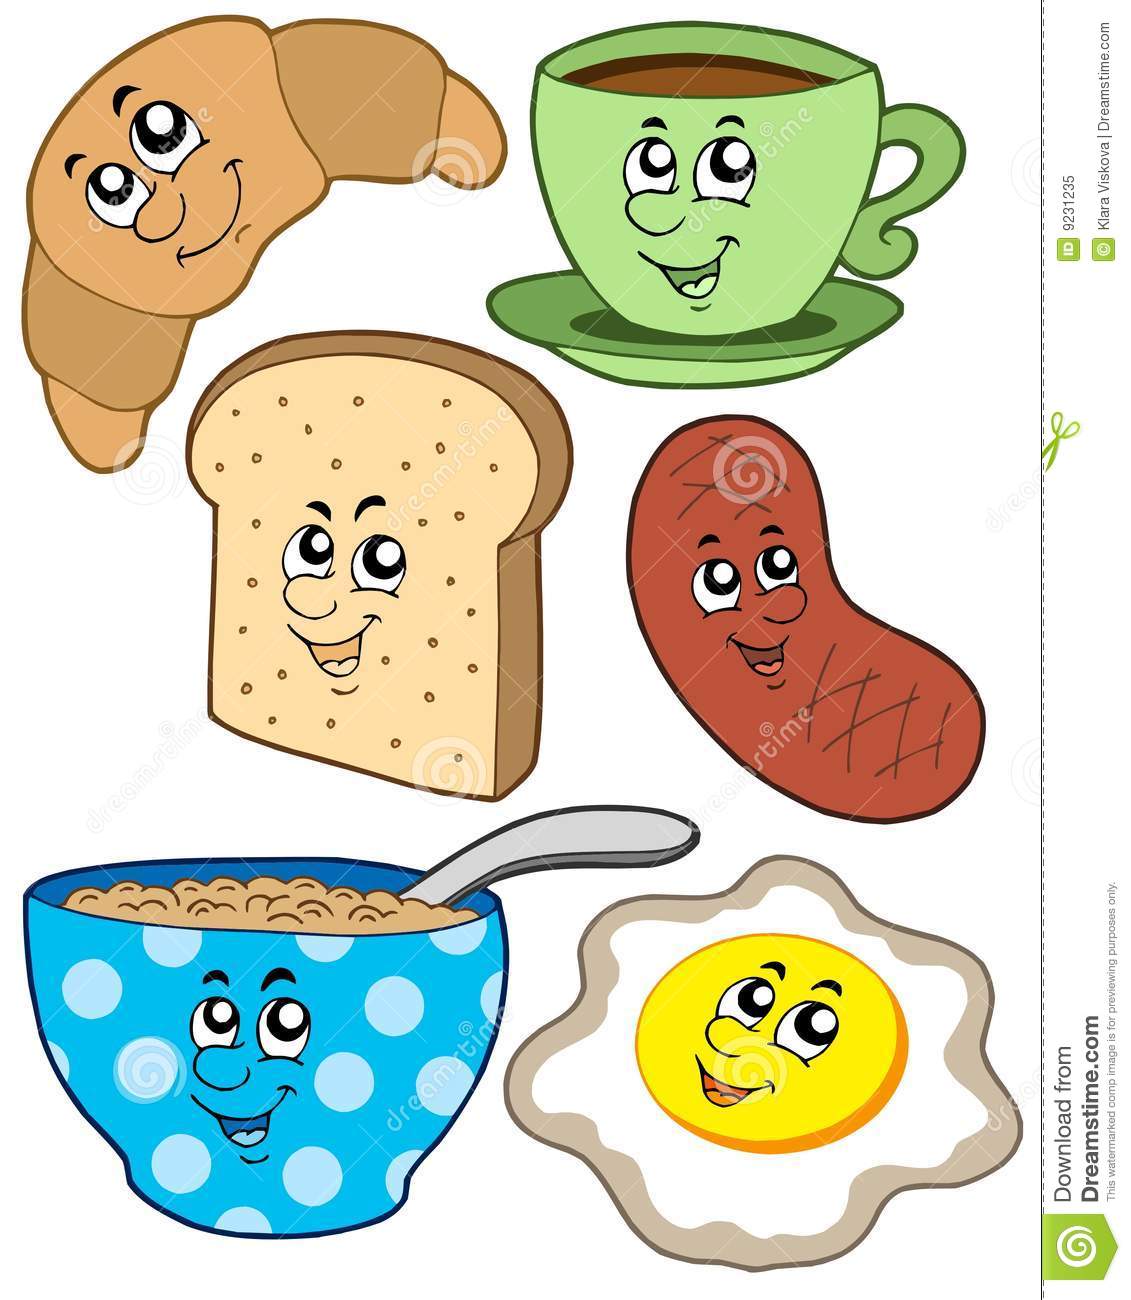 Cartoon Breakfast Collection Royalty Free Stock Photo   Image  9231235